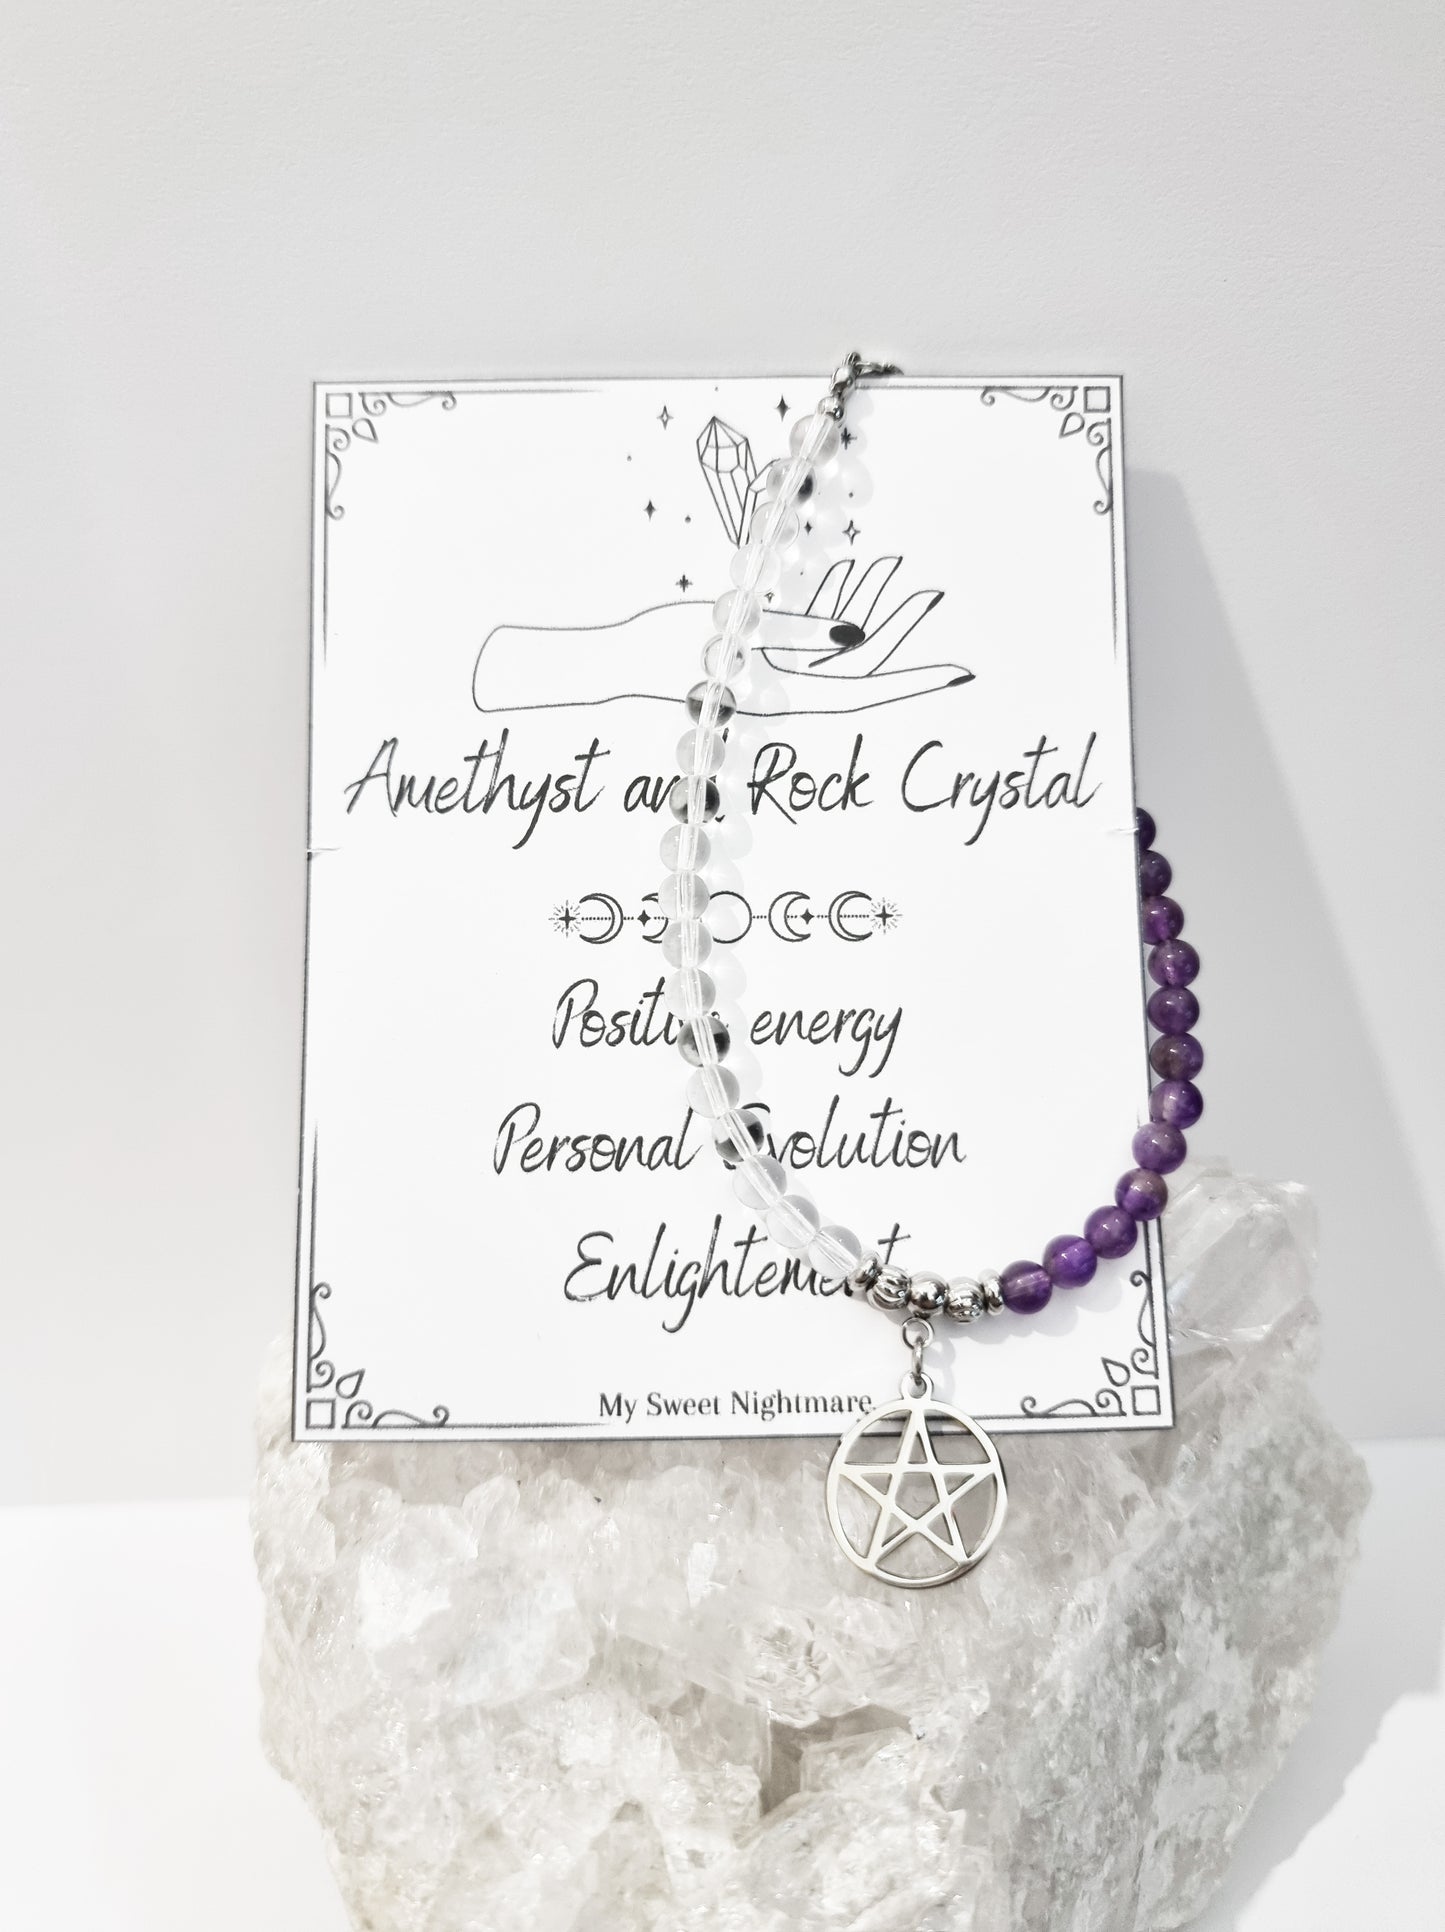 Bracelet with pentacle, amethyst and rock crystal